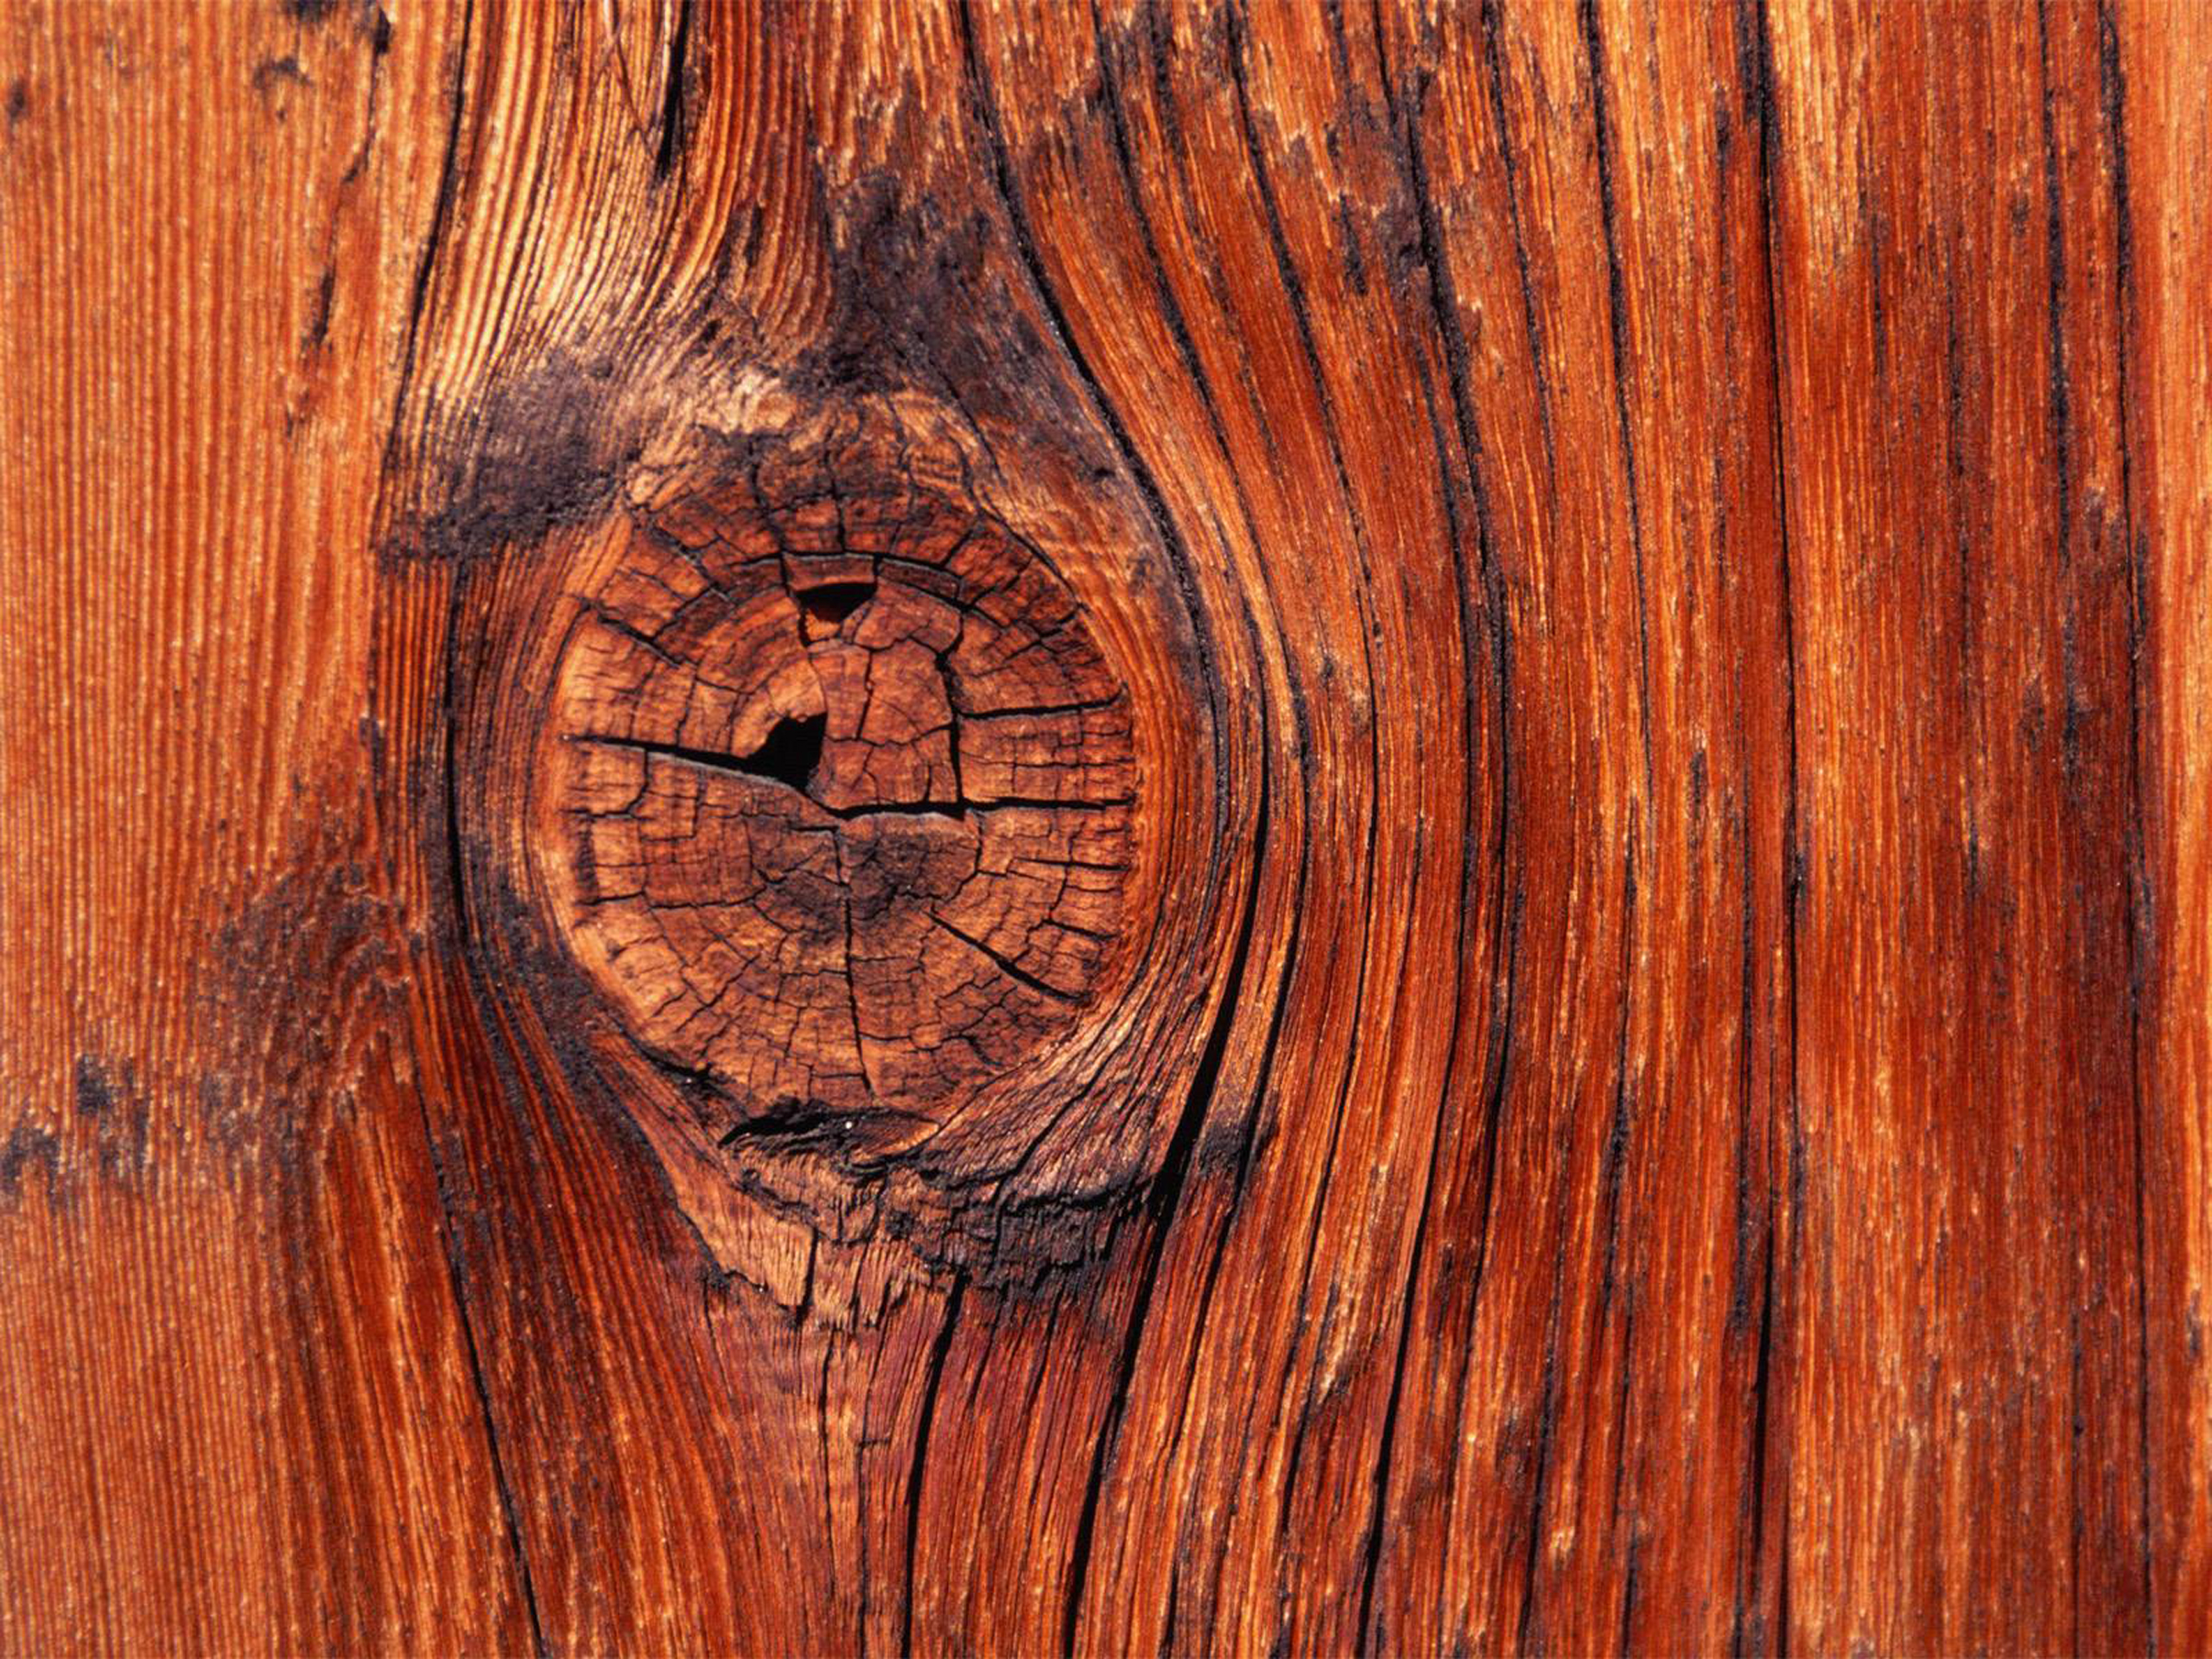 Wood Desktop Wallpaper For HD Widescreen And Mobile